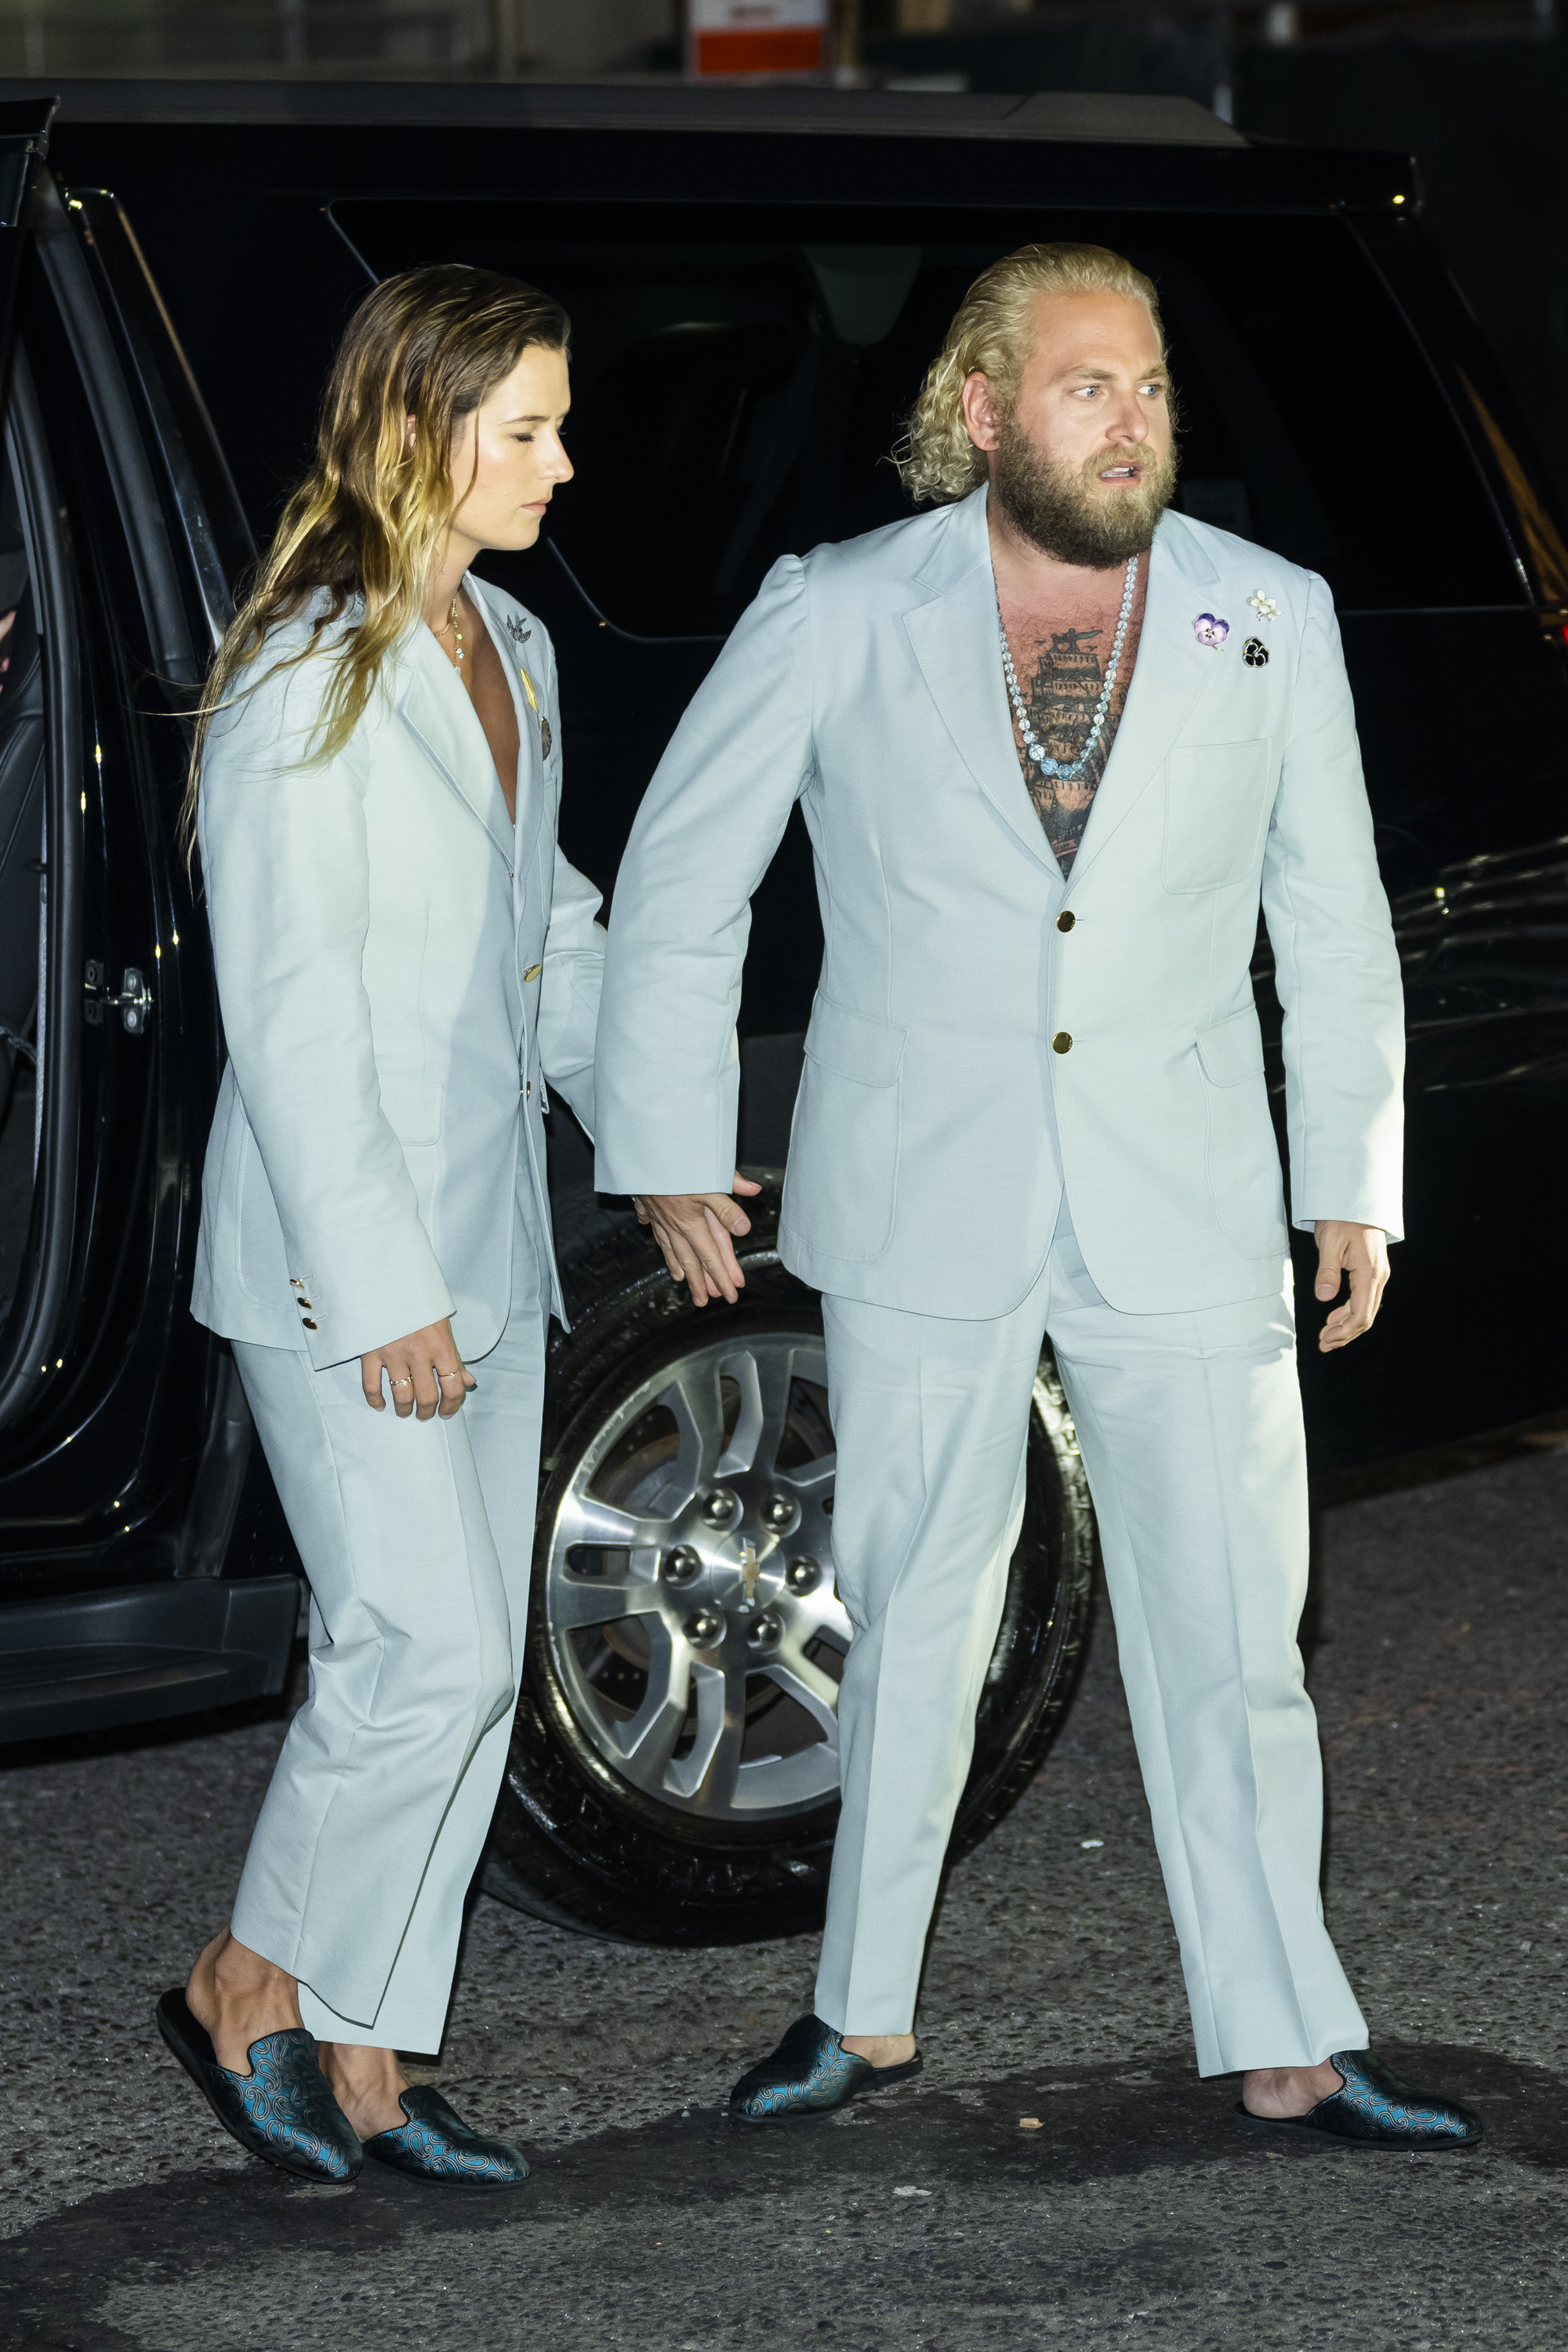 Close-up of Jonah and Sarah outside wearing matching suits